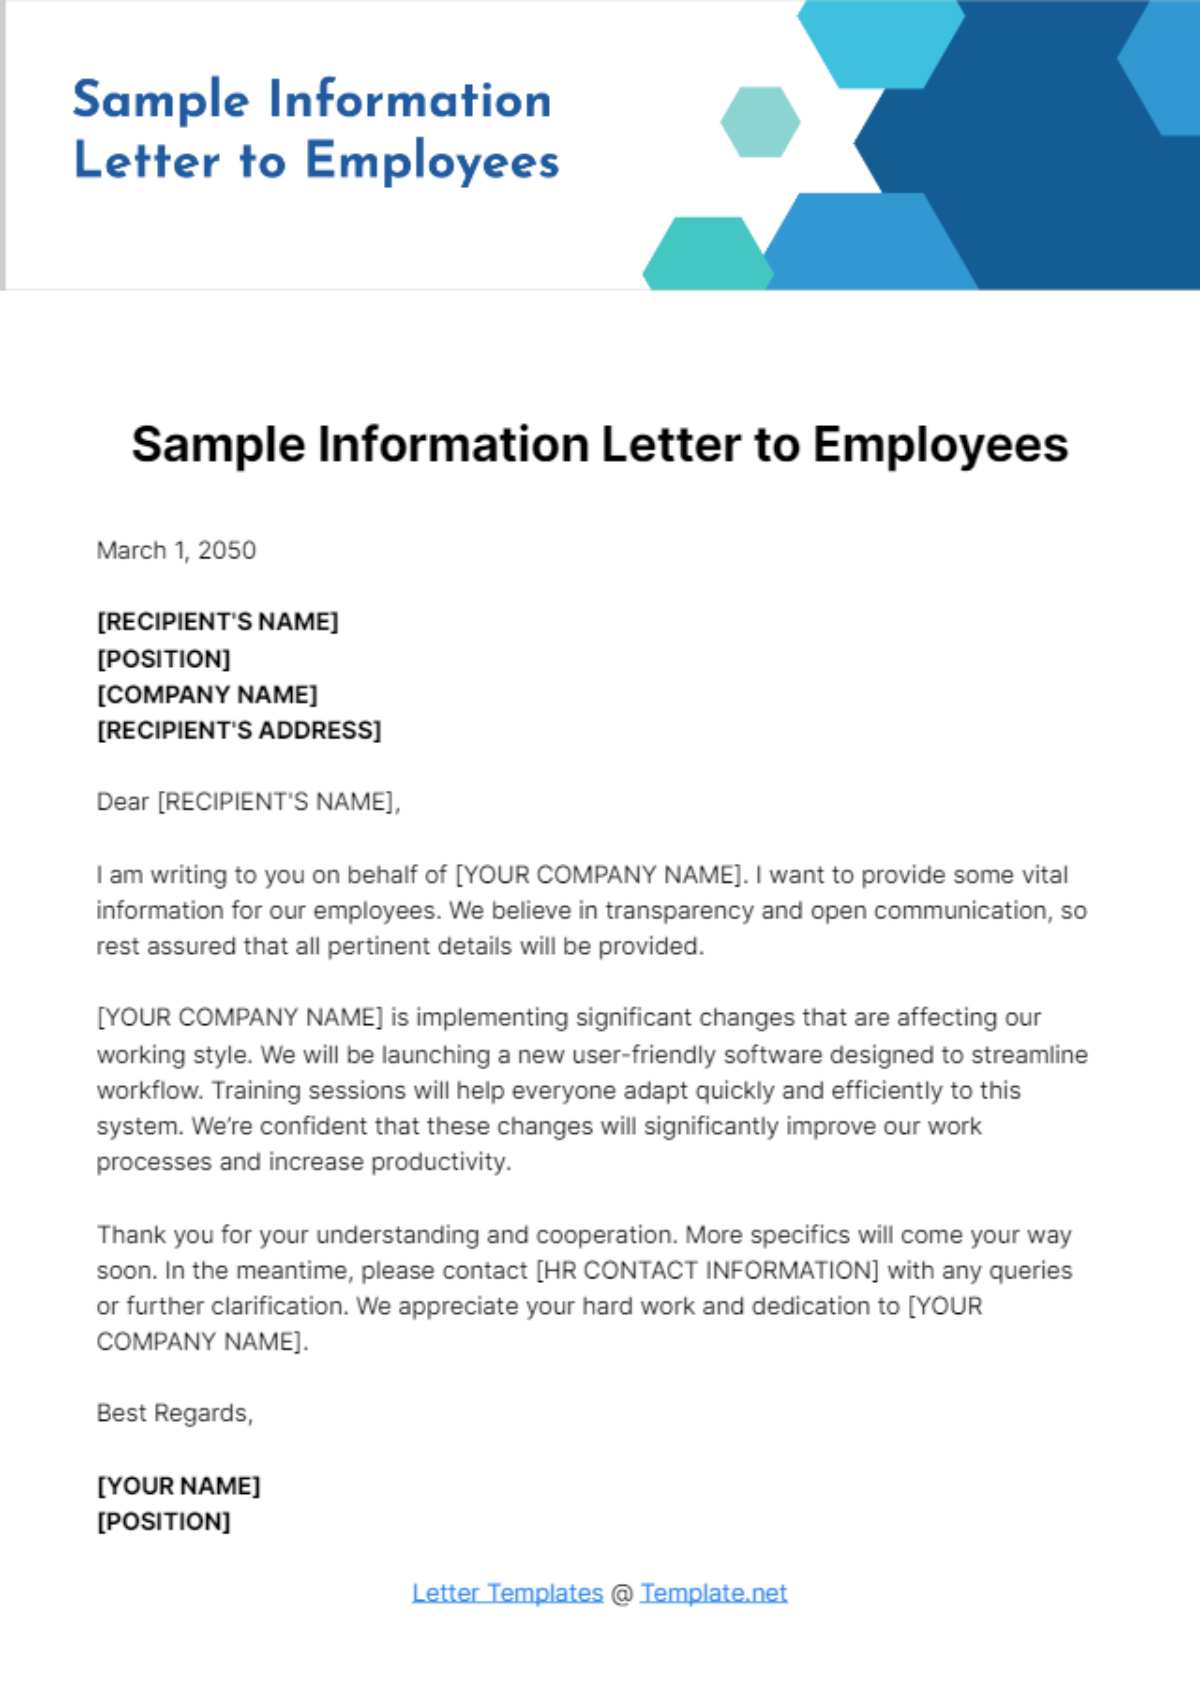 Free Sample Information Letter to Employees Template